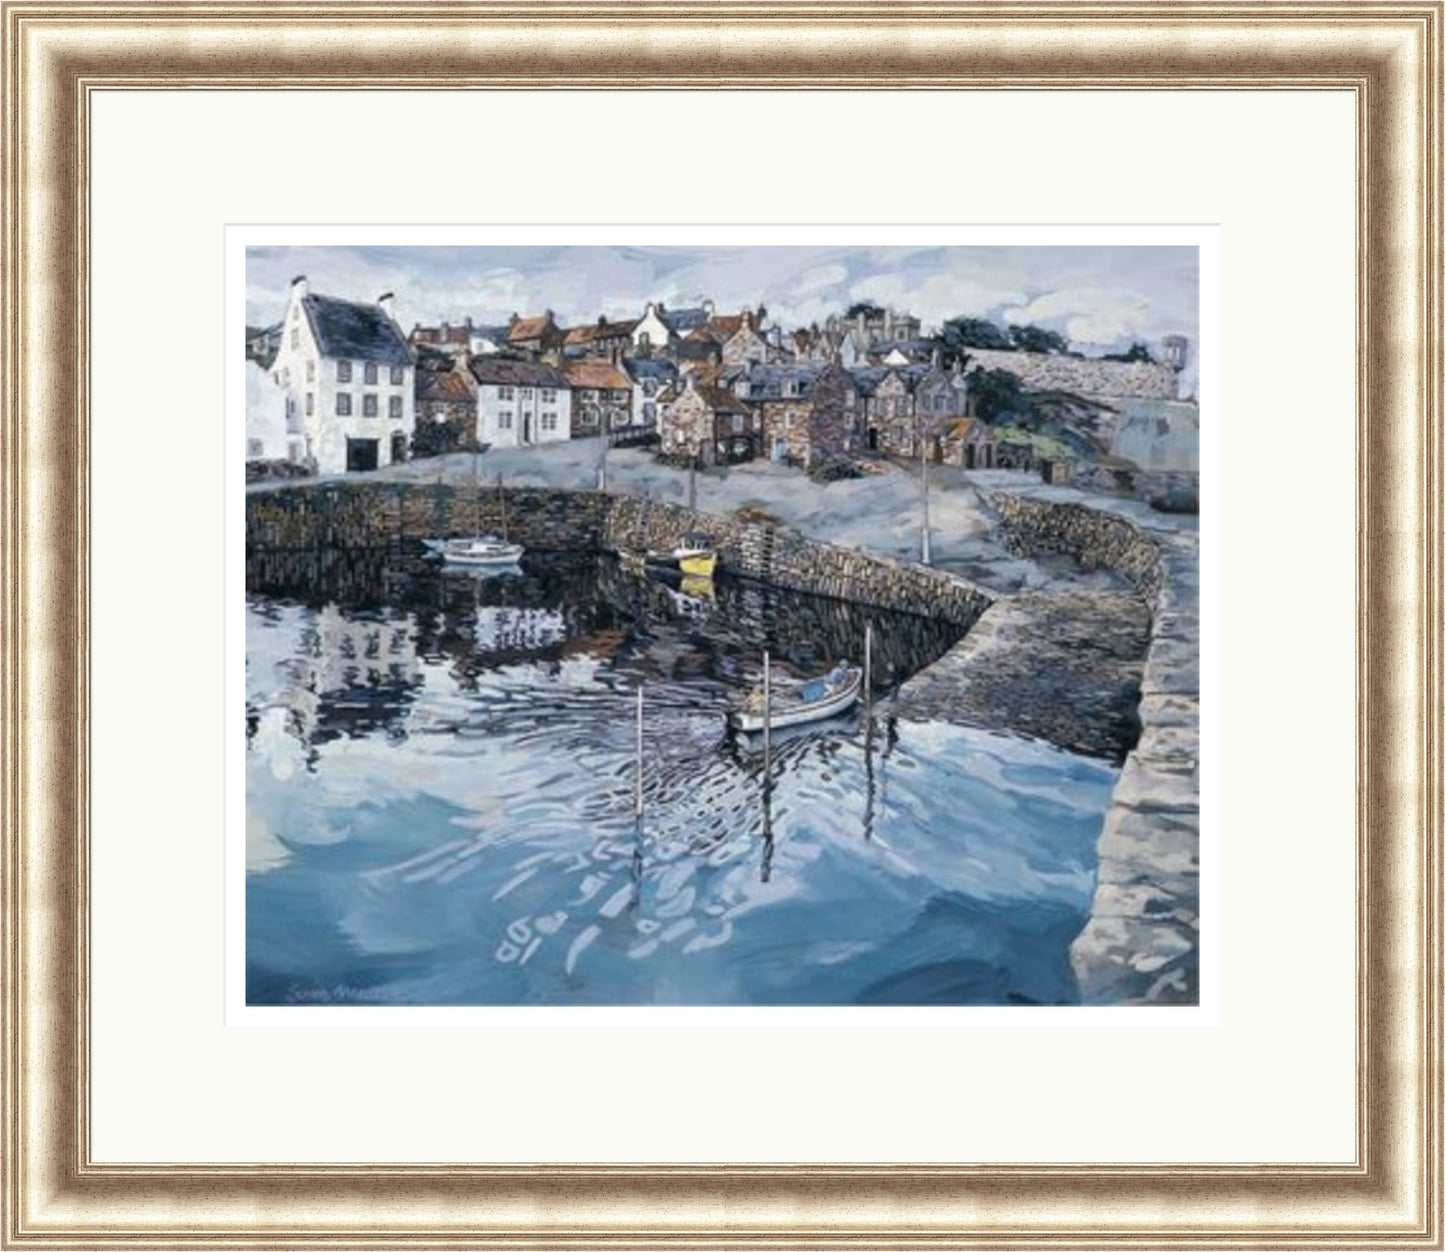 The Boat Comes in, Crail by Sonas McLean